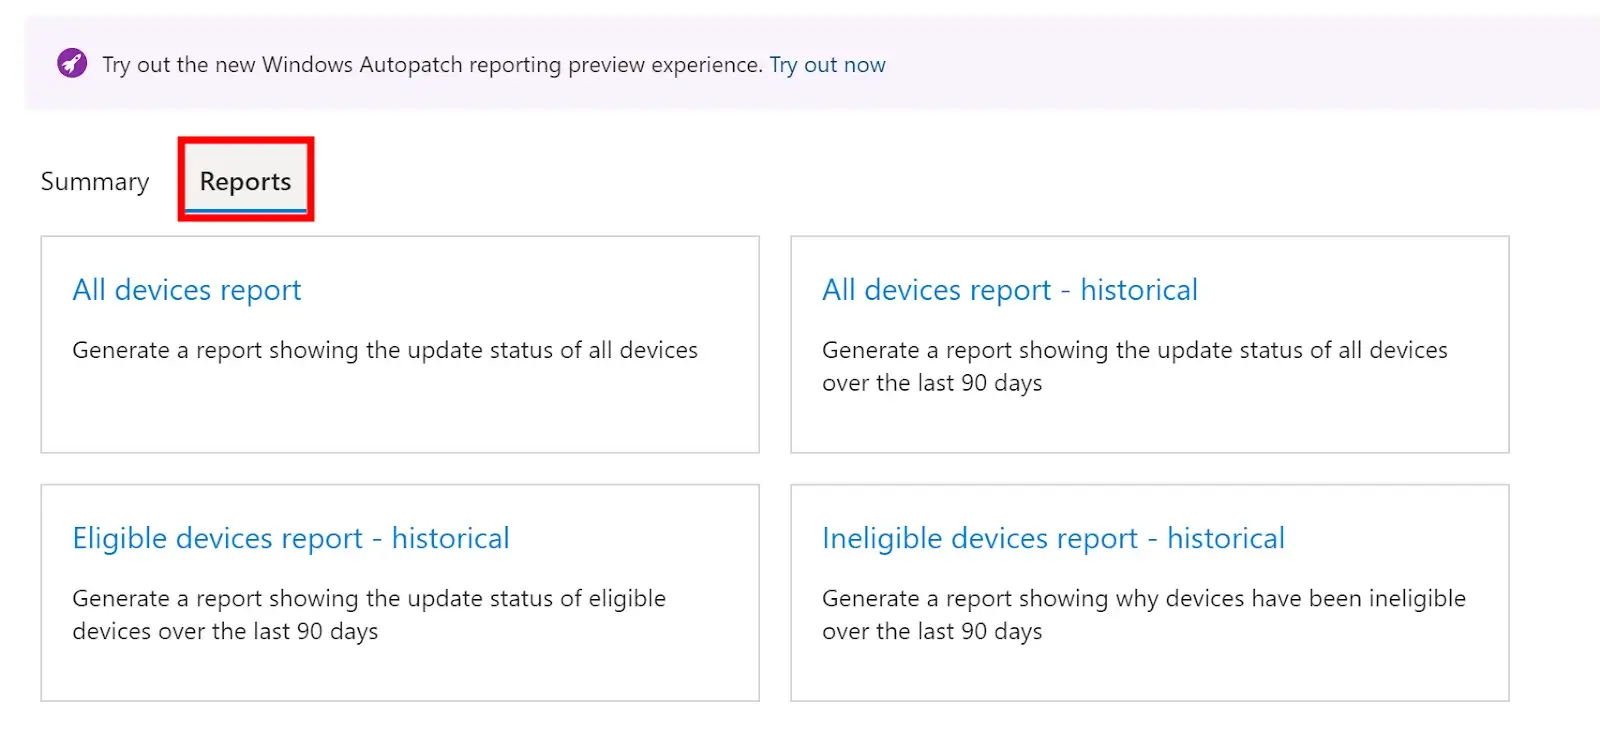 Switching from the Summary to Reports tab will give you more detailed reports on all managed devices.